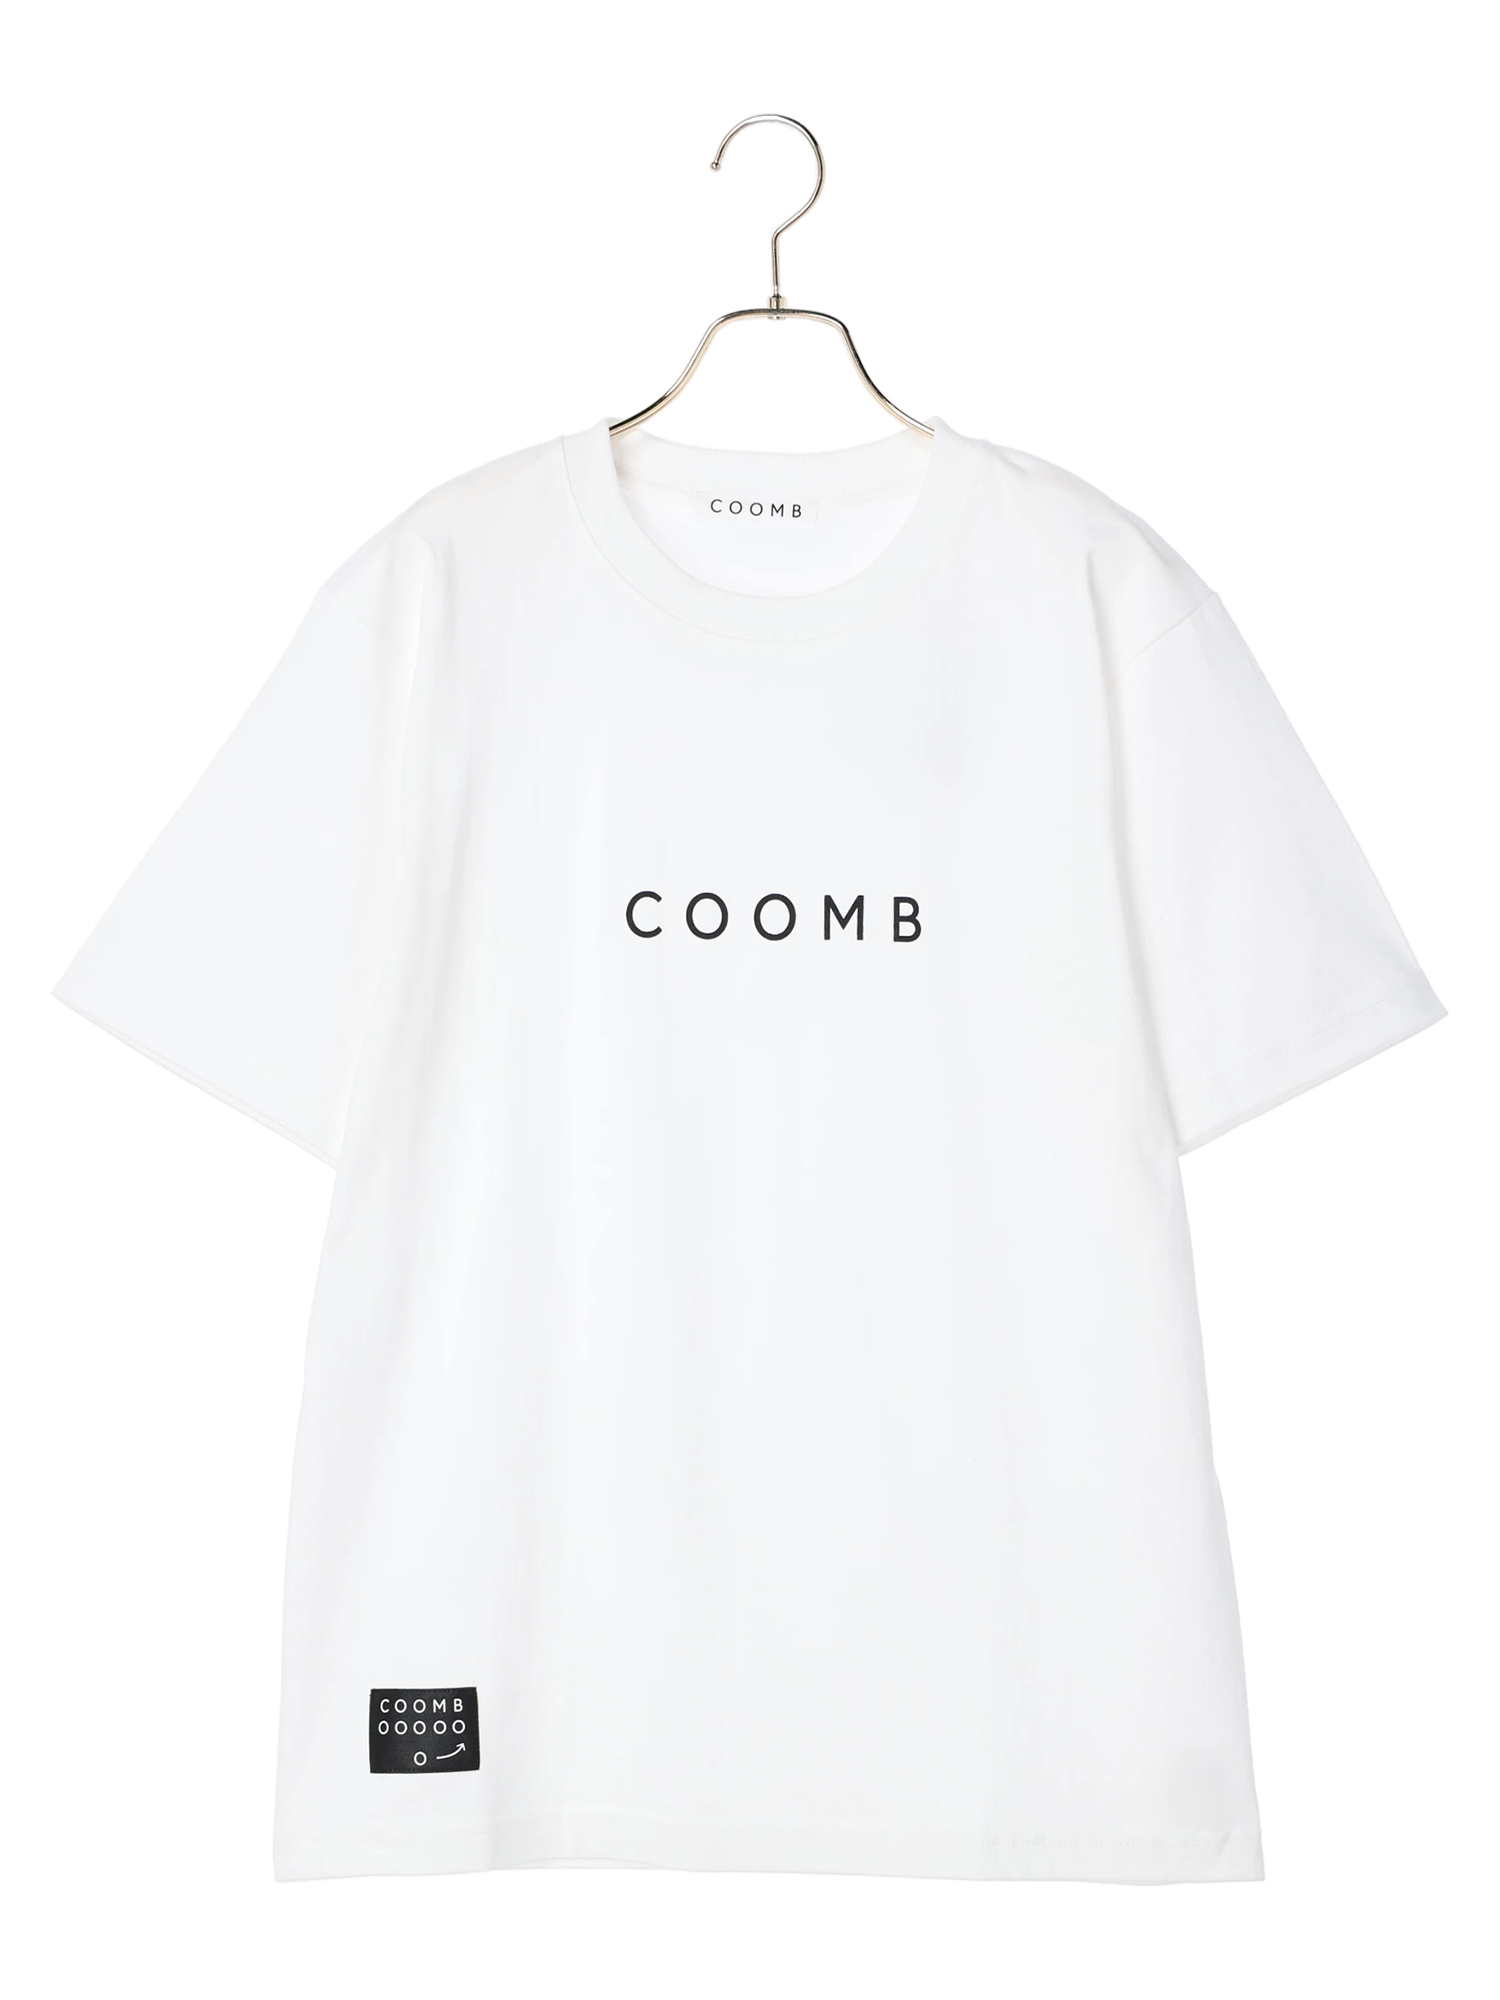 COOMBロゴTシャツ/S-L / COOMB（クーム）のTシャツカットソー通販